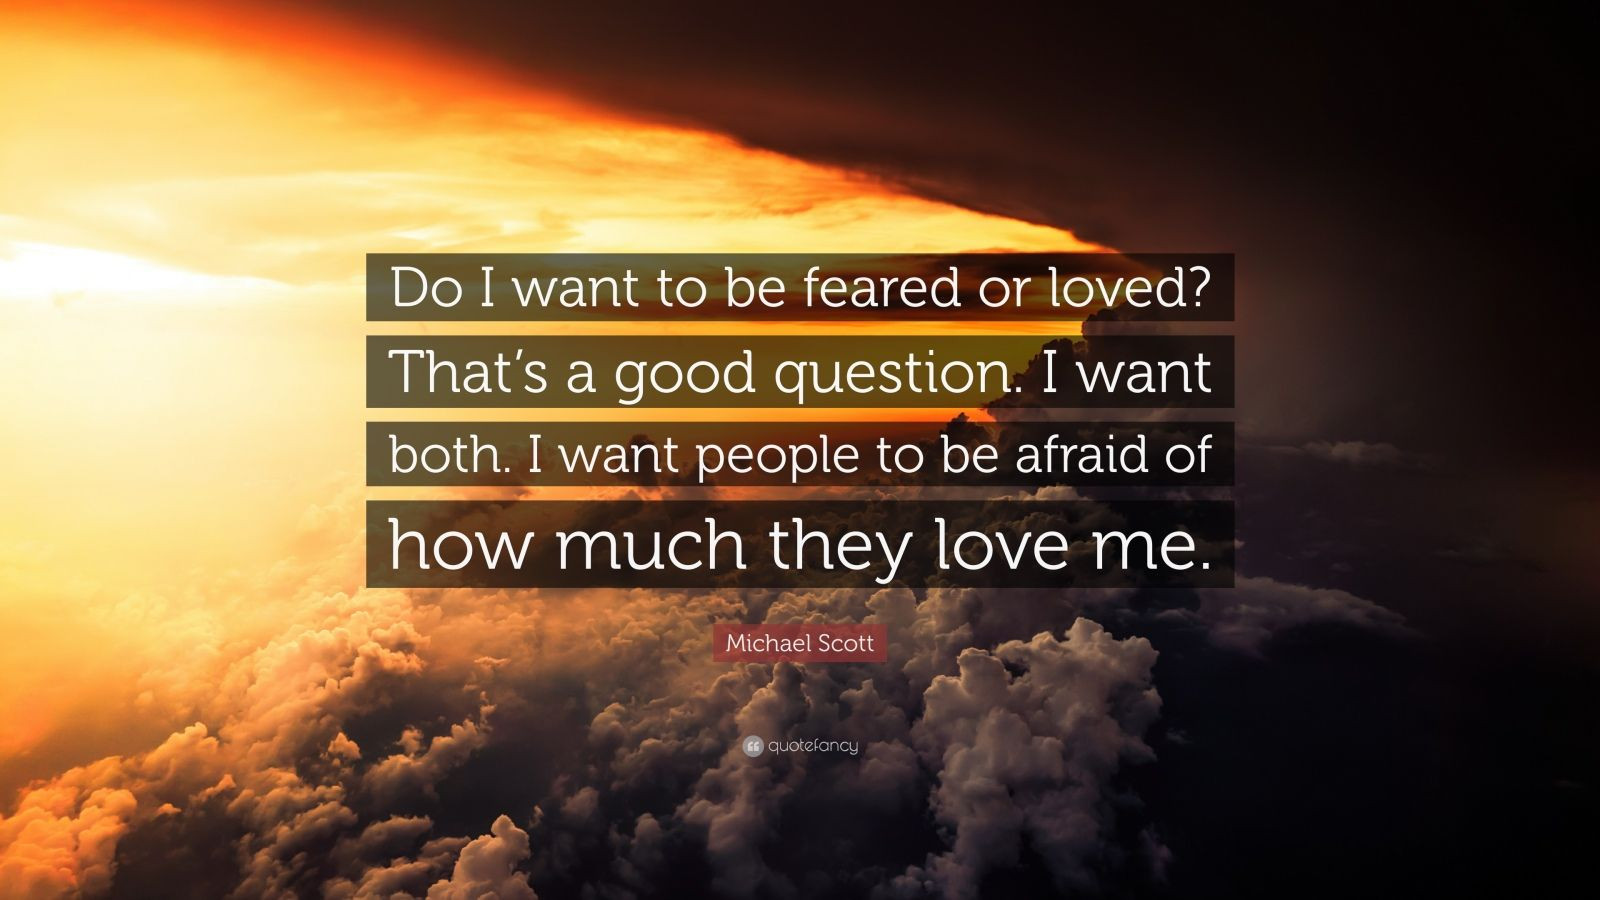 Michael Scott Quotes About Love
 Michael Scott Quote “Do I want to be feared or loved